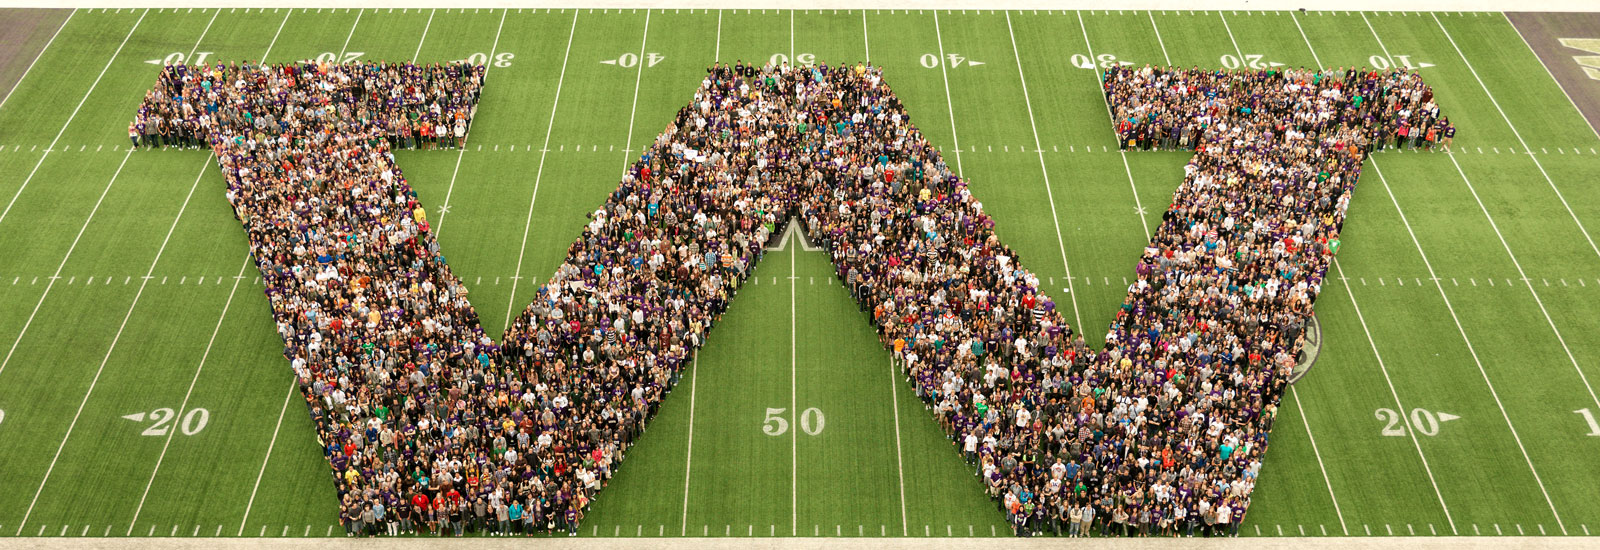 A group of people on a football field in the shape of a W